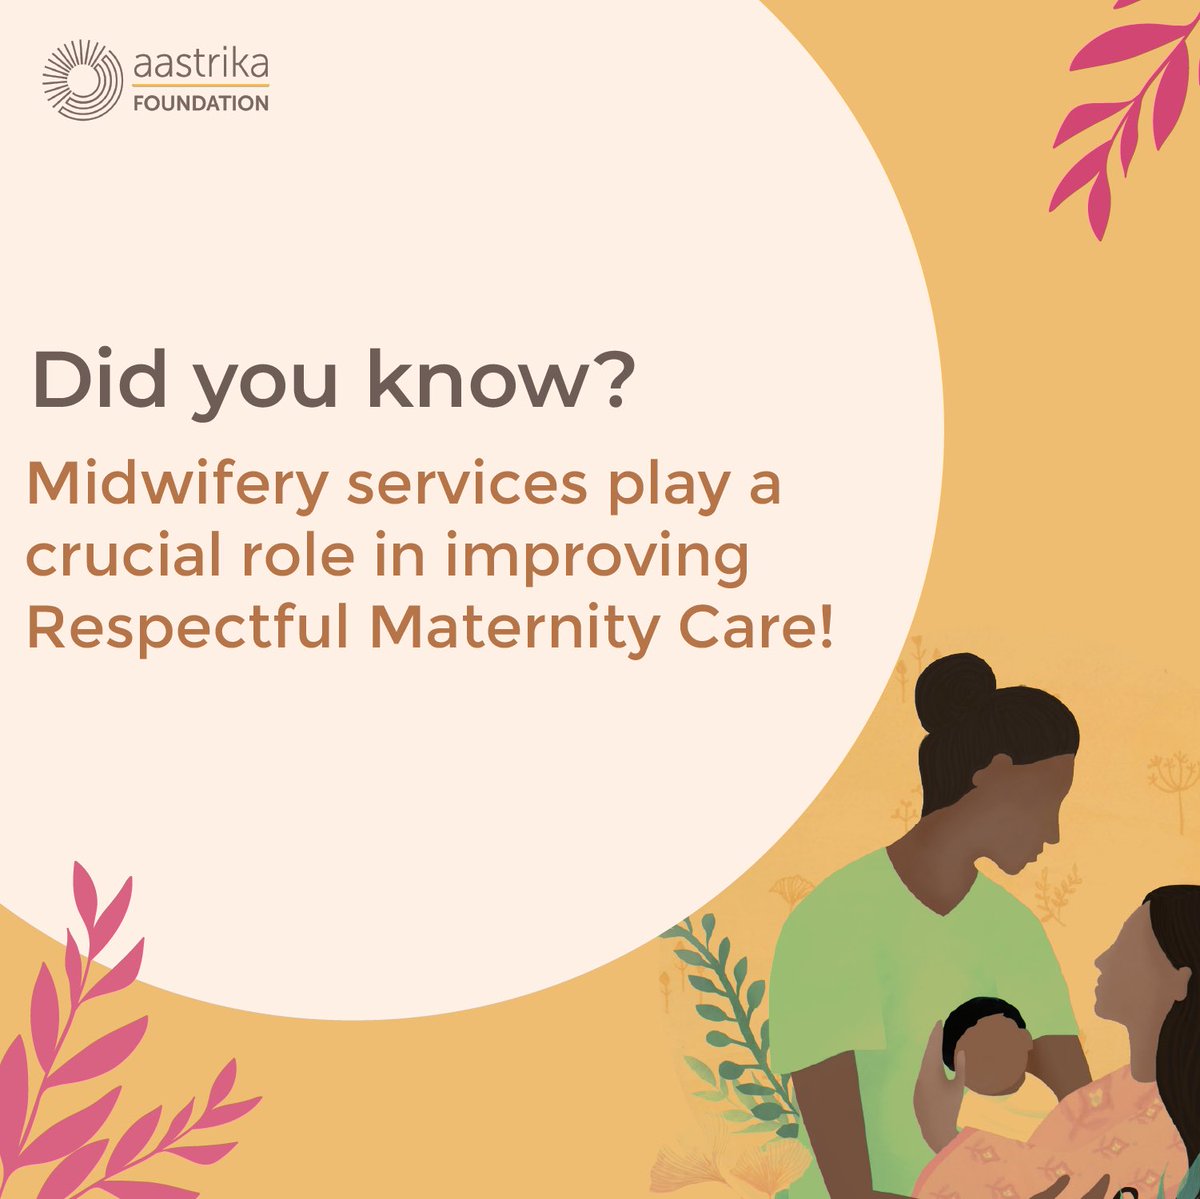 At the heart of quality maternal and newborn health services is the fundamental human right to Respectful Maternity Care (RMC). Skilled midwives go beyond medical expertise to weave a tapestry of care that respects each woman and newborn as unique individuals.